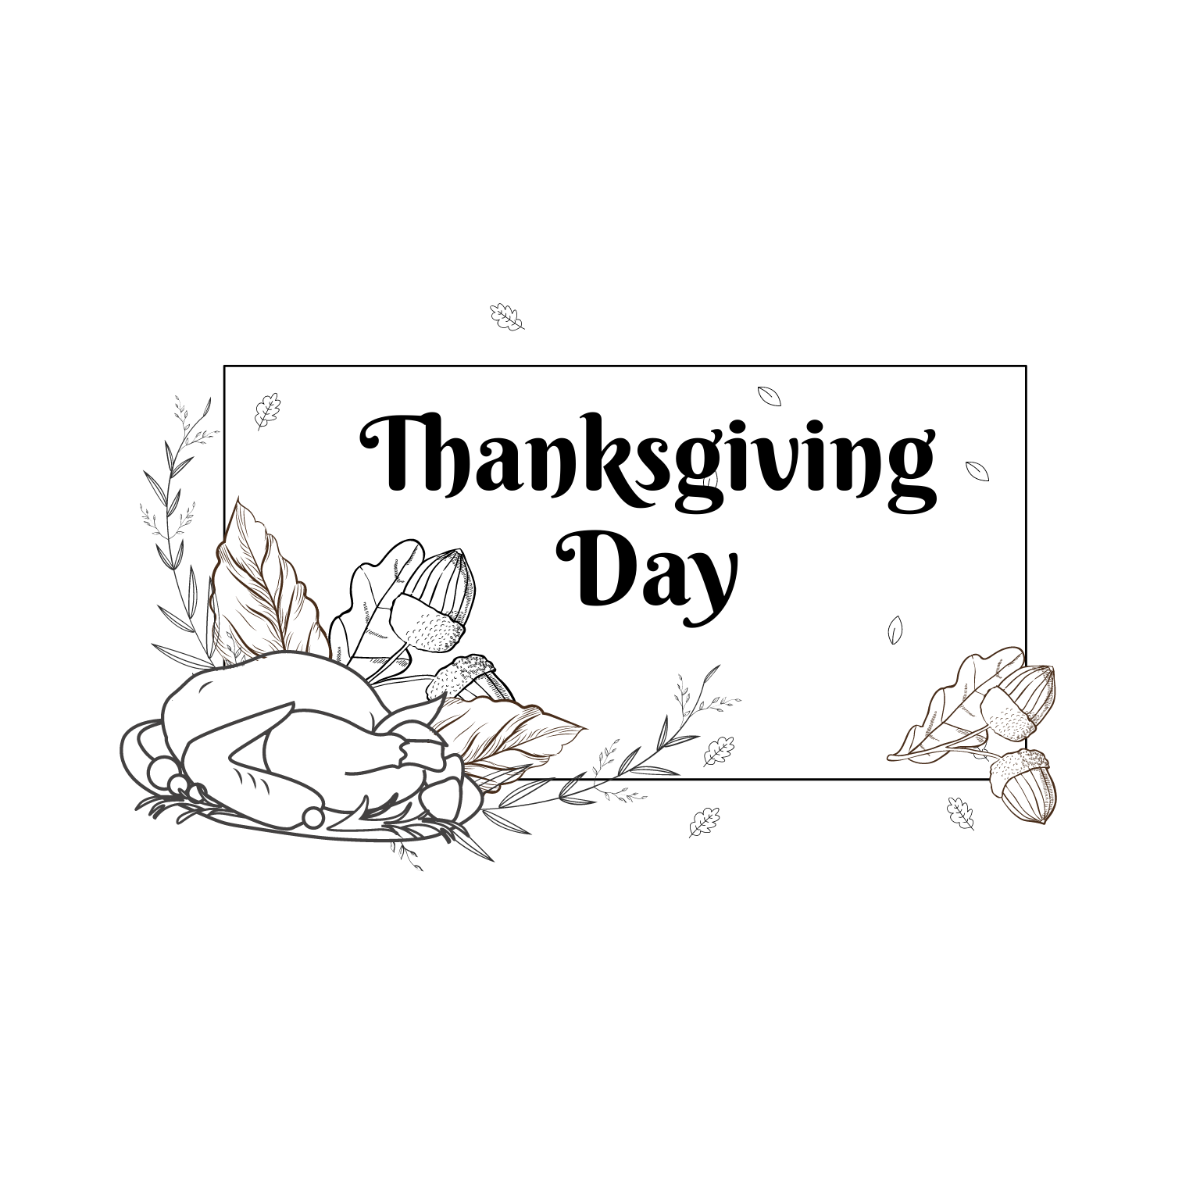 Thanksgiving Day Image Drawing Template